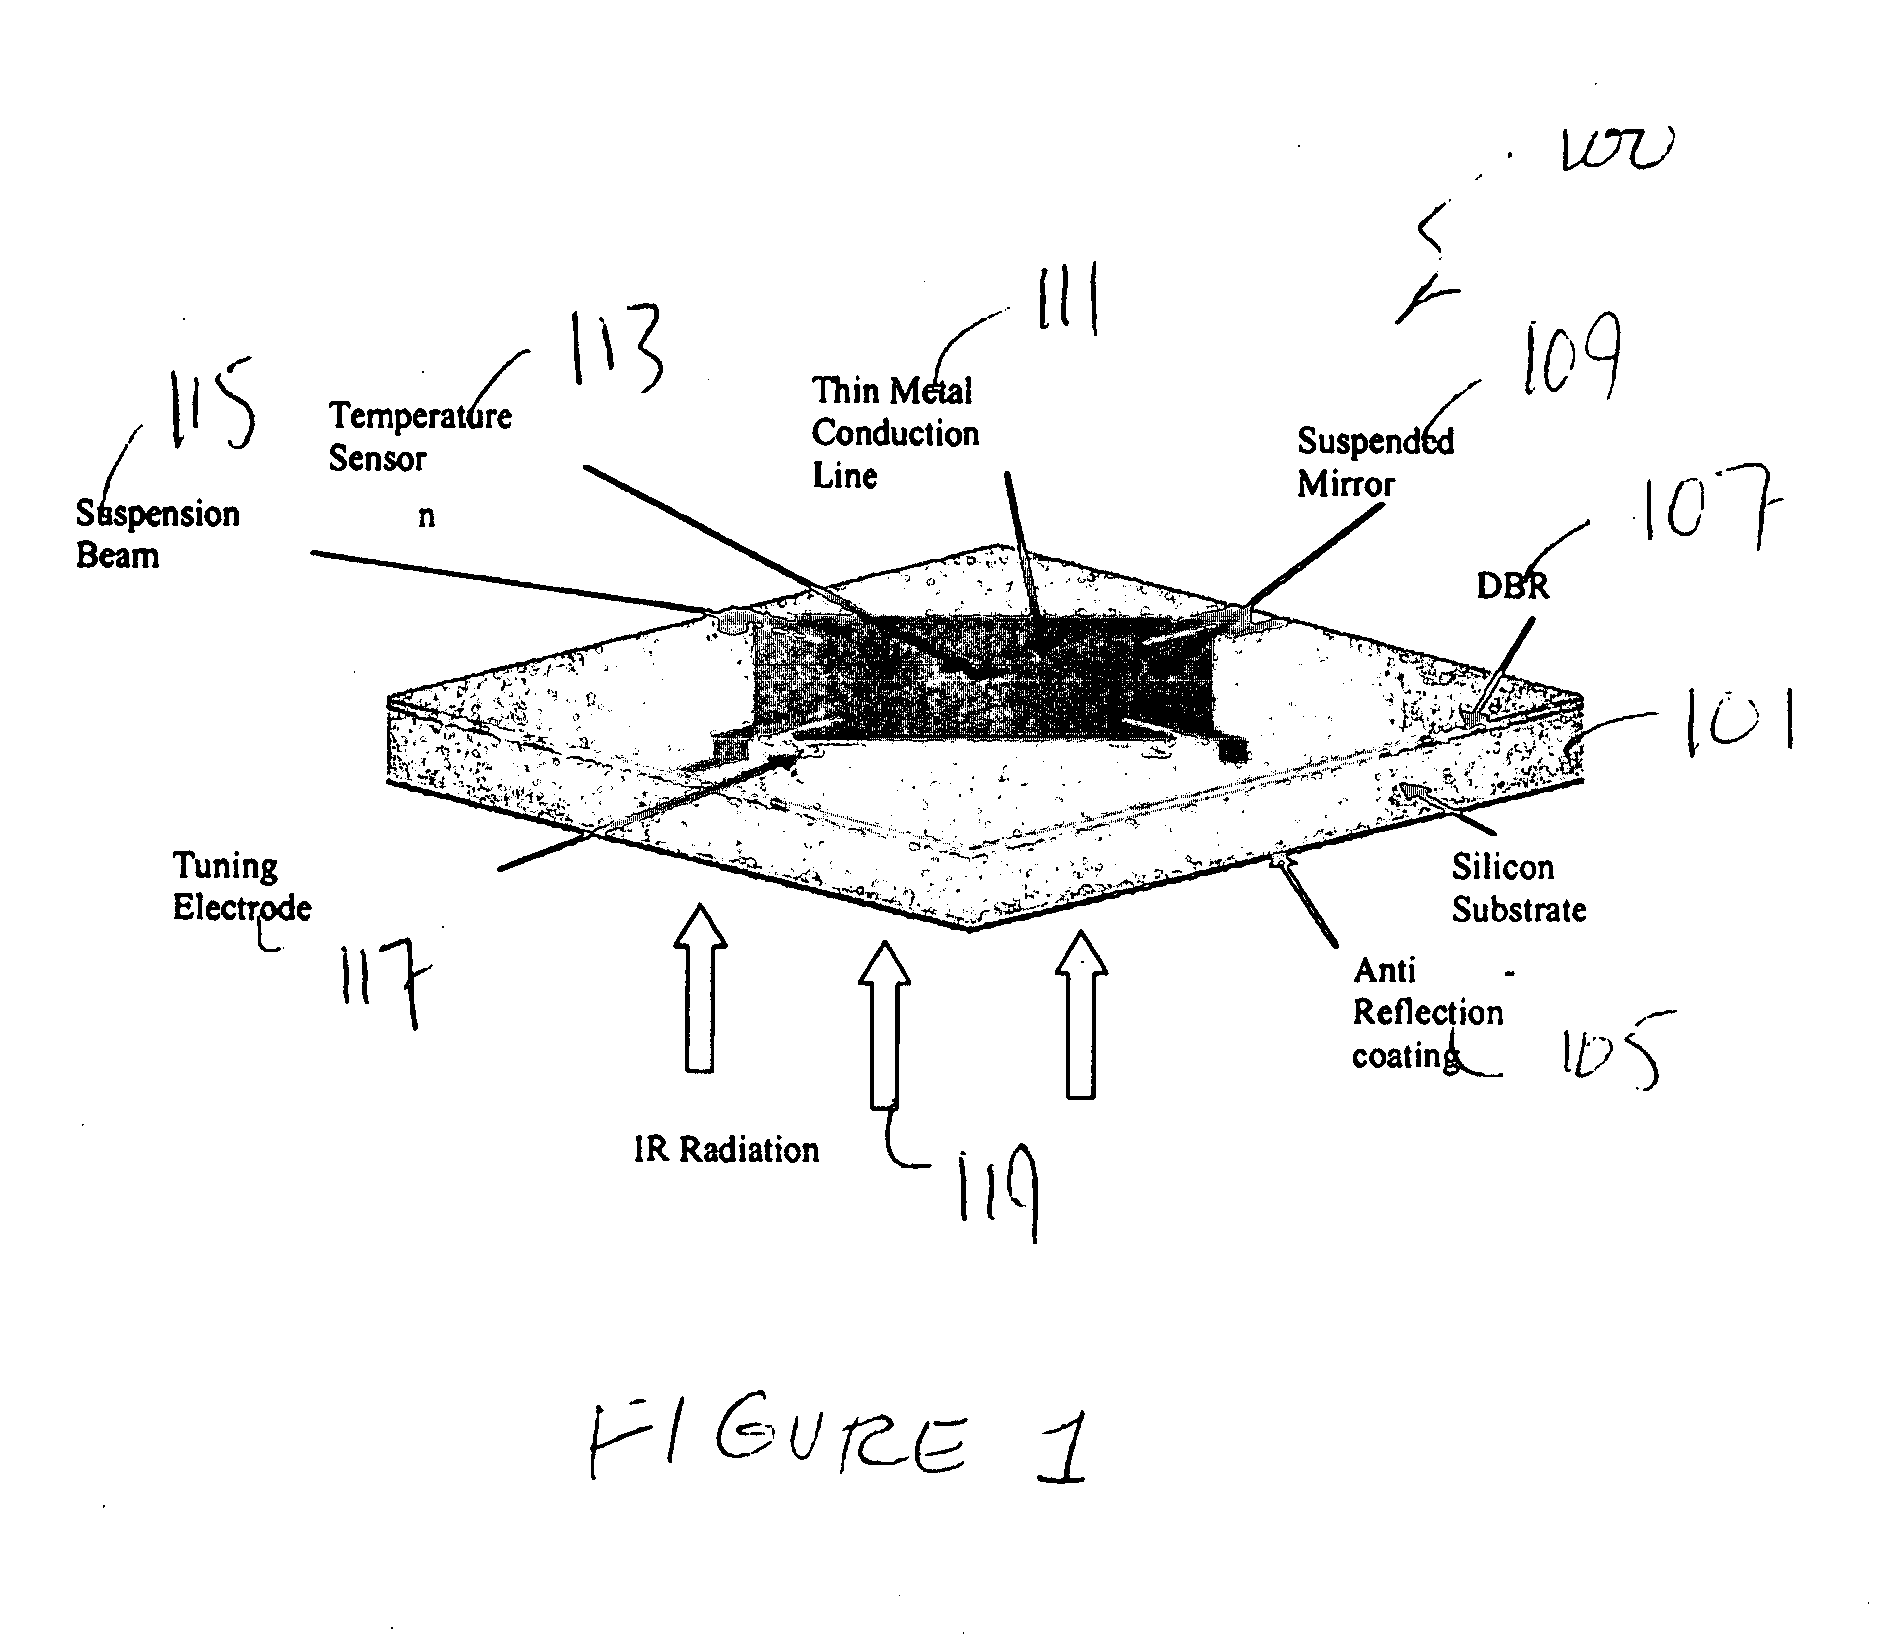 Apparatus and method for sensing electromagnetic radiation using a tunable device